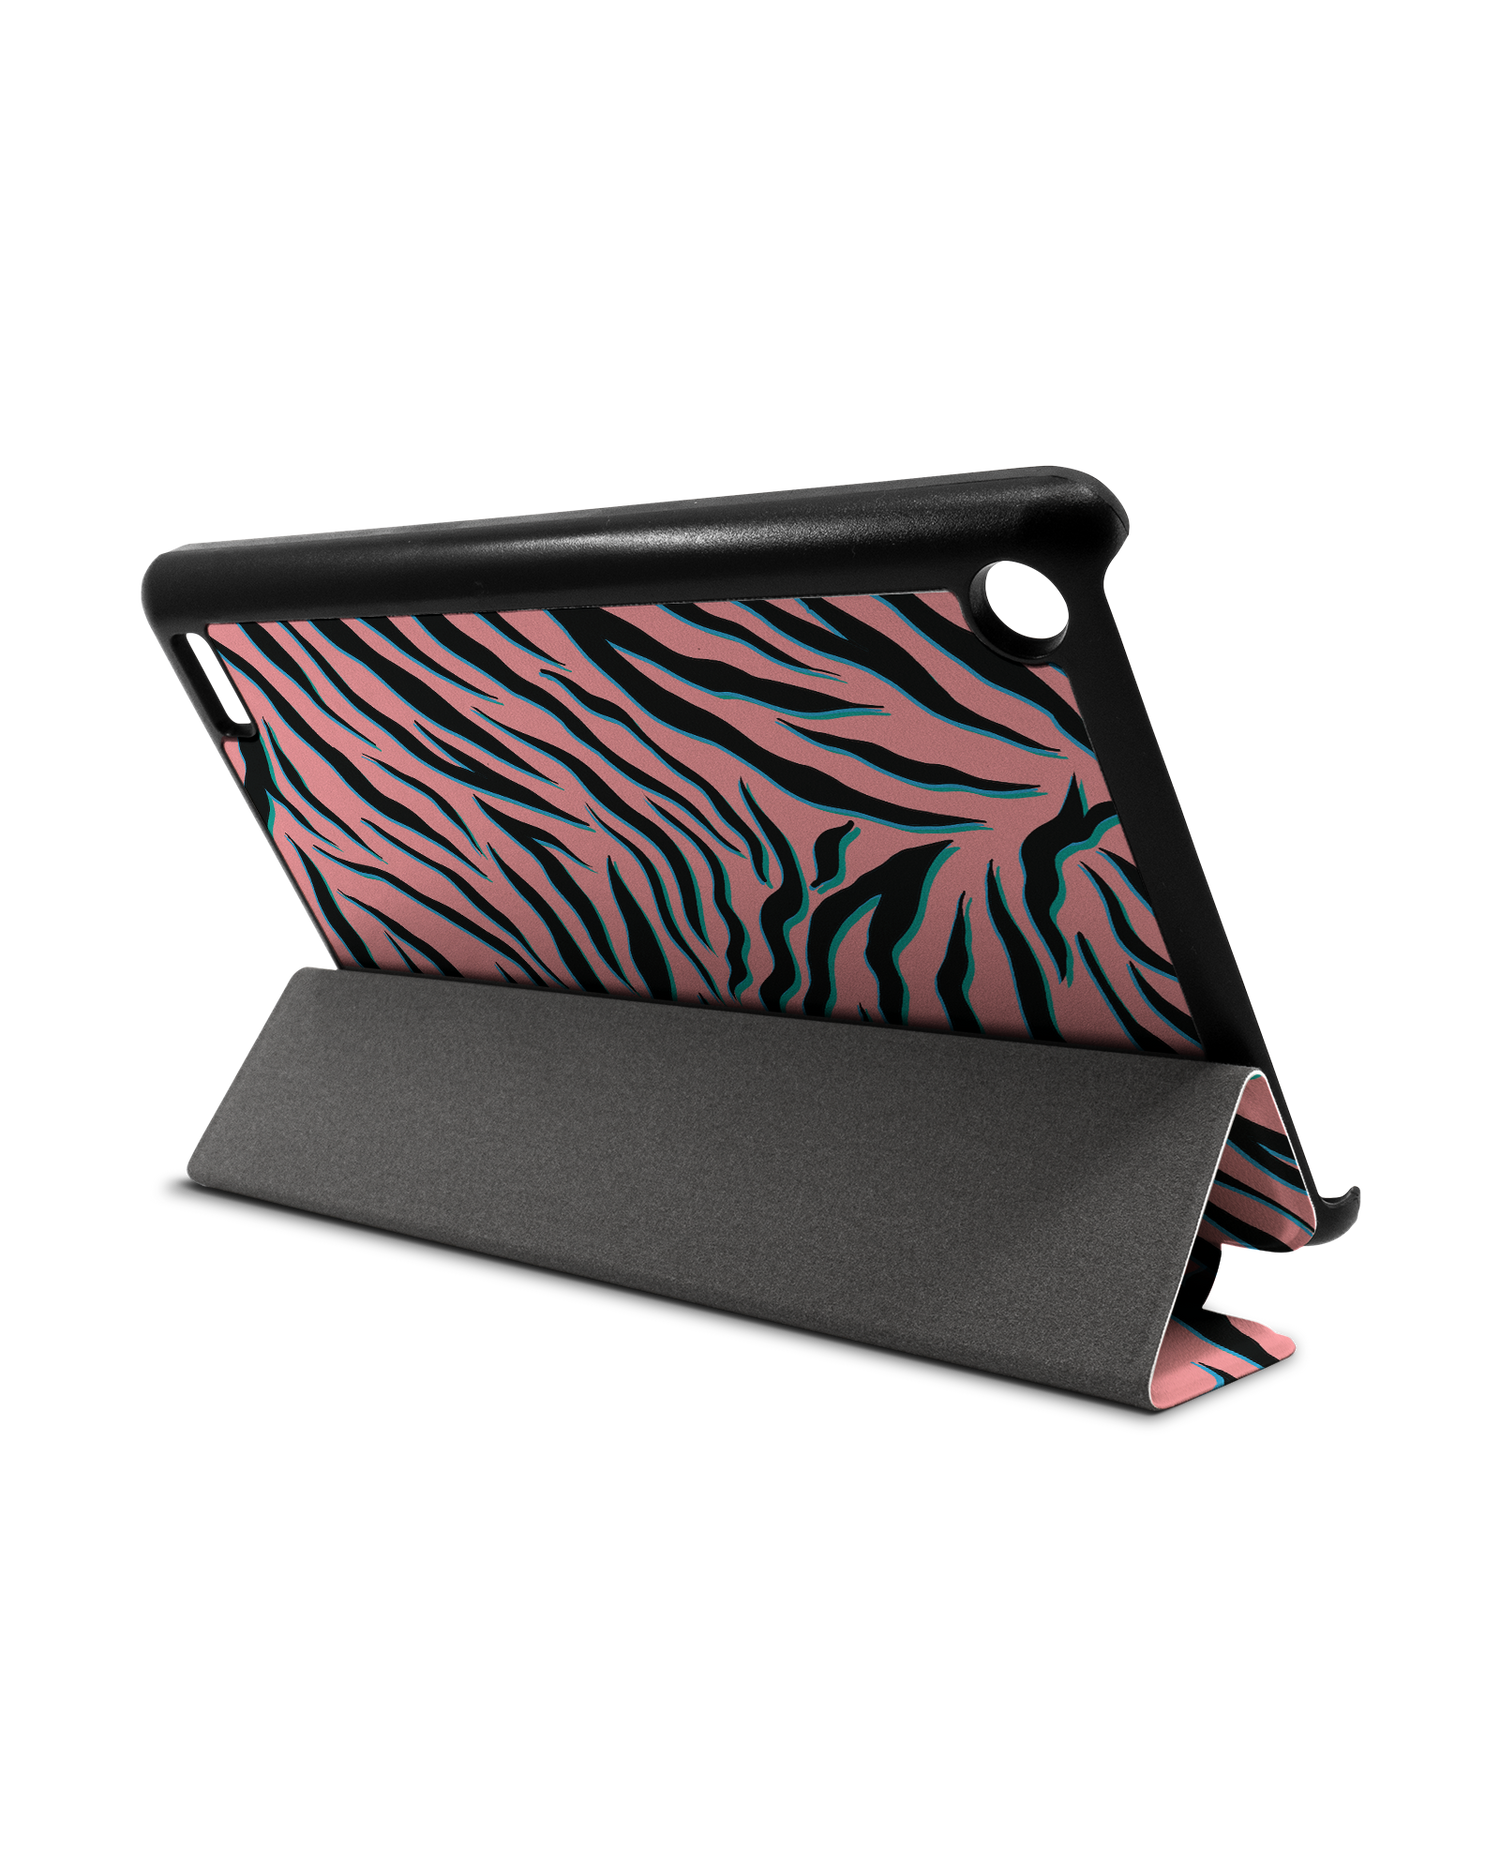 Pink Zebra Tablet Smart Case for Amazon Fire 7: Used as Stand